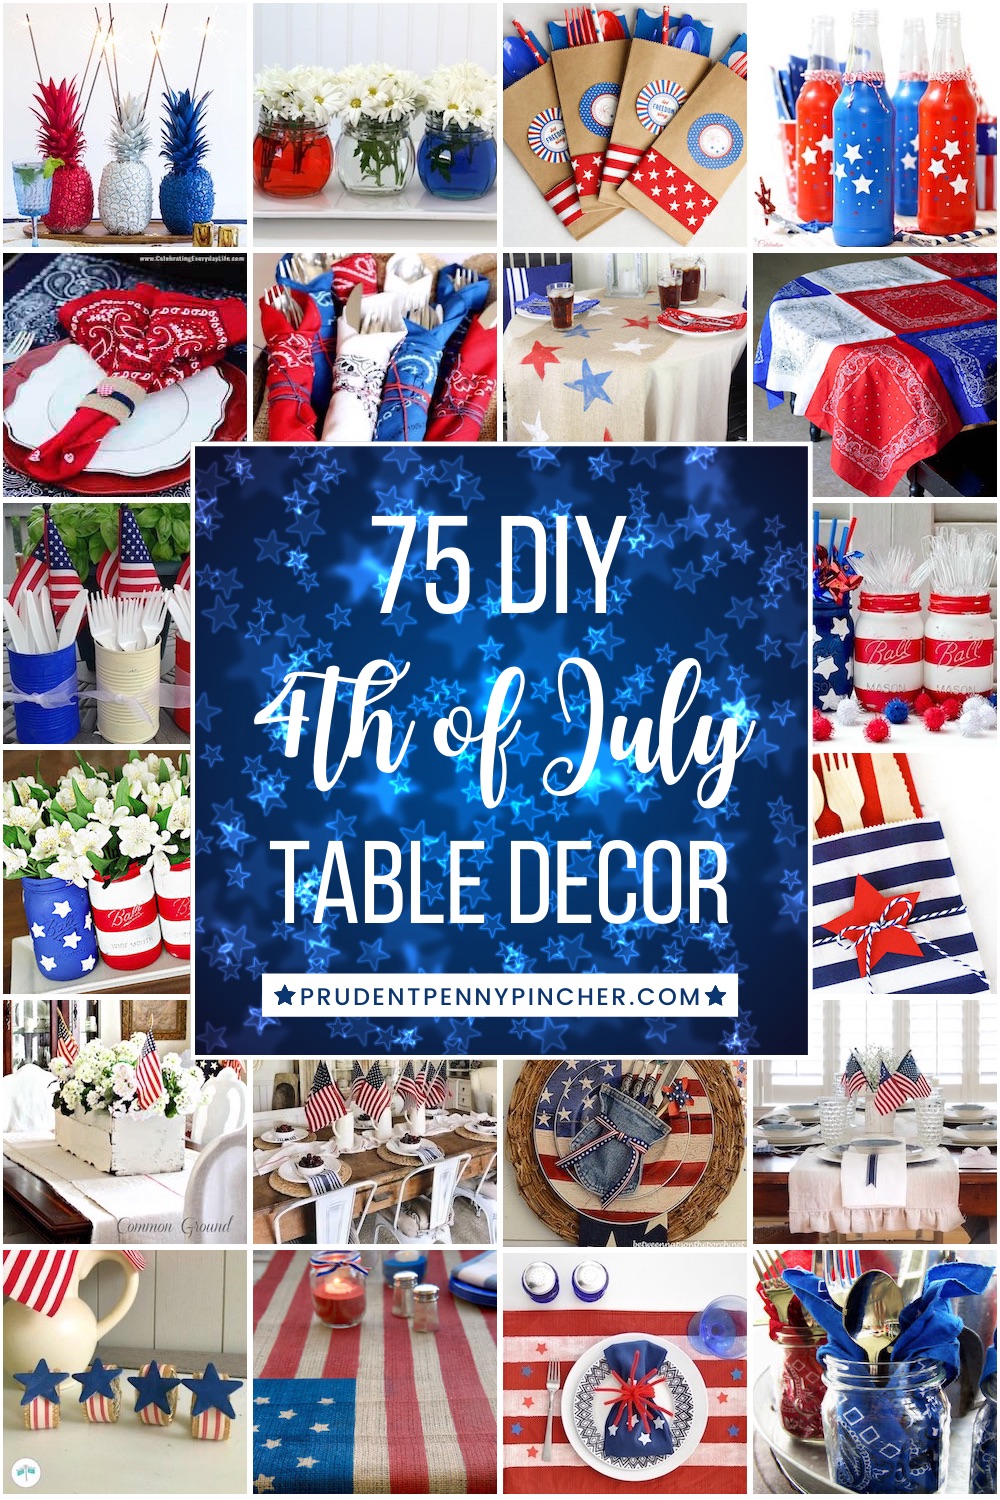 Patriotic Decor: Elegant Ways to Decorate with Red White and Blue